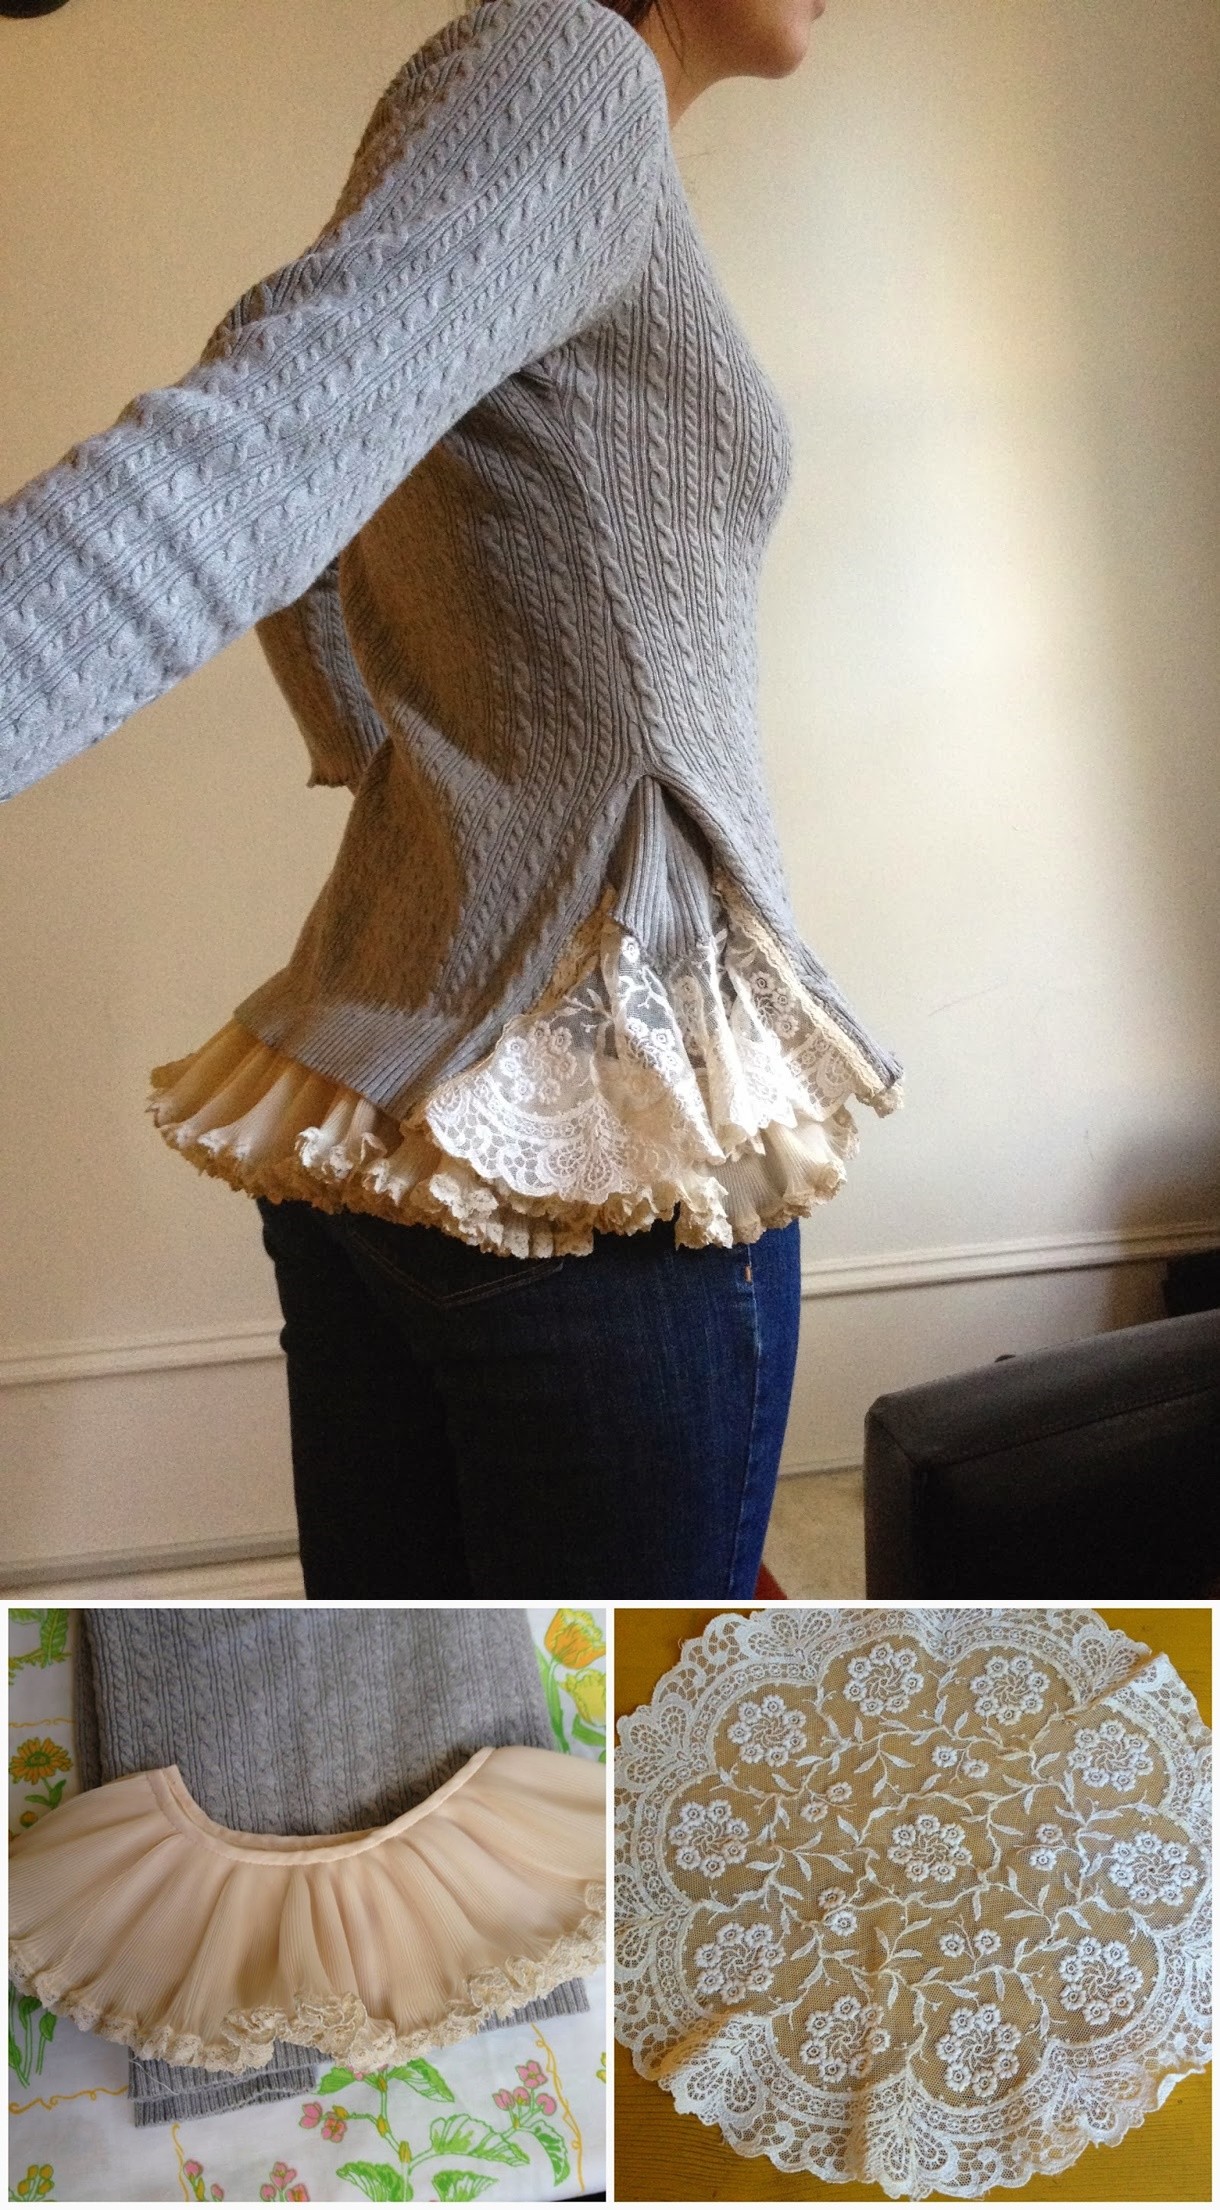 Make a Romantic Lace Sweater from Pieces